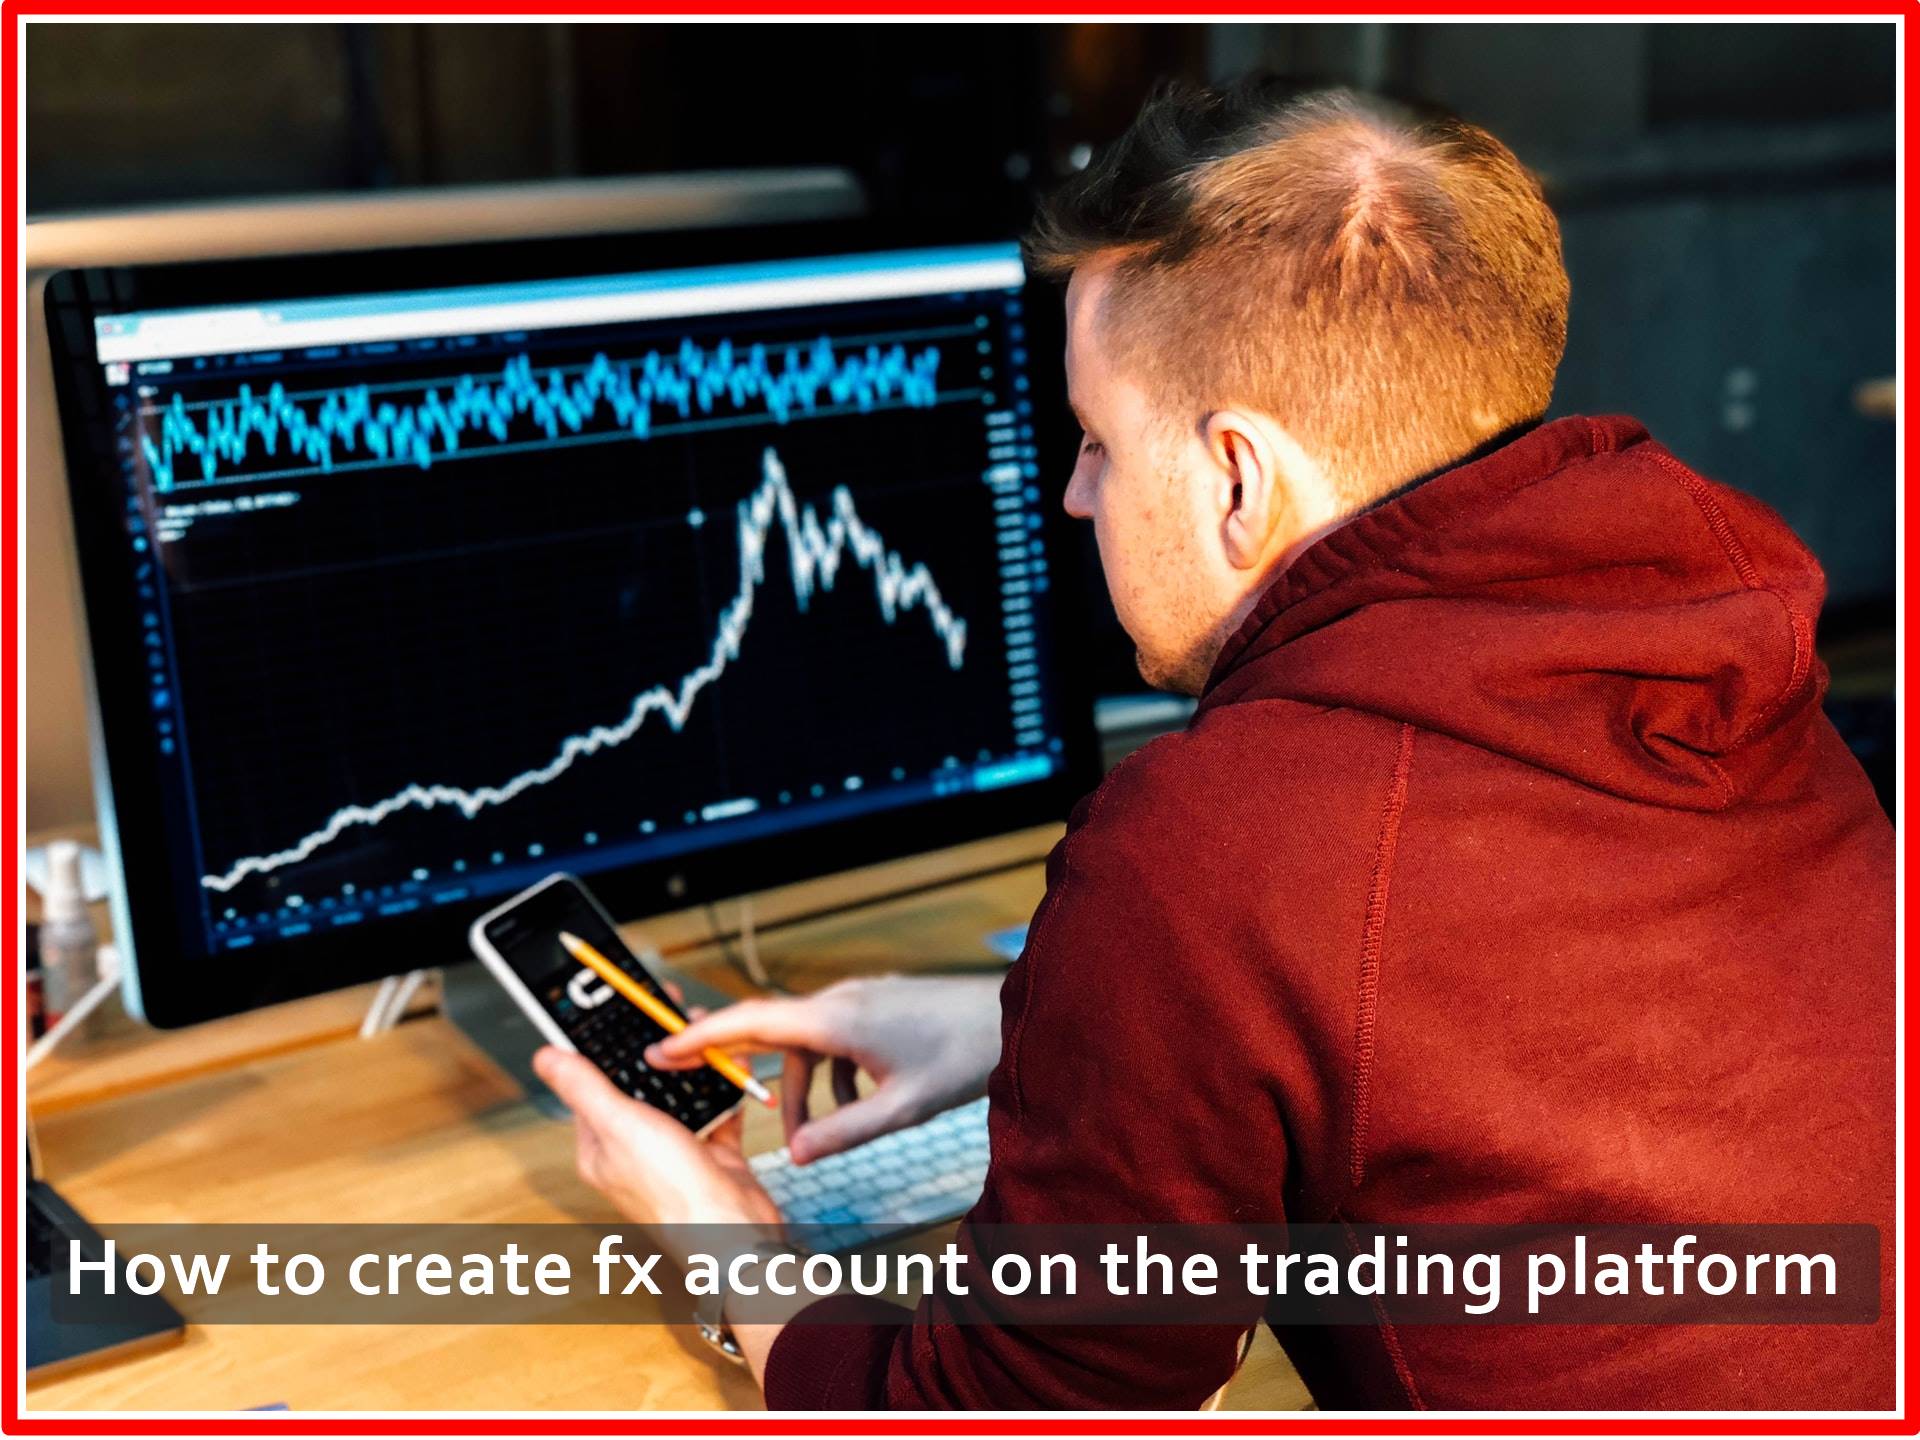 How to create fx account on the trading platform